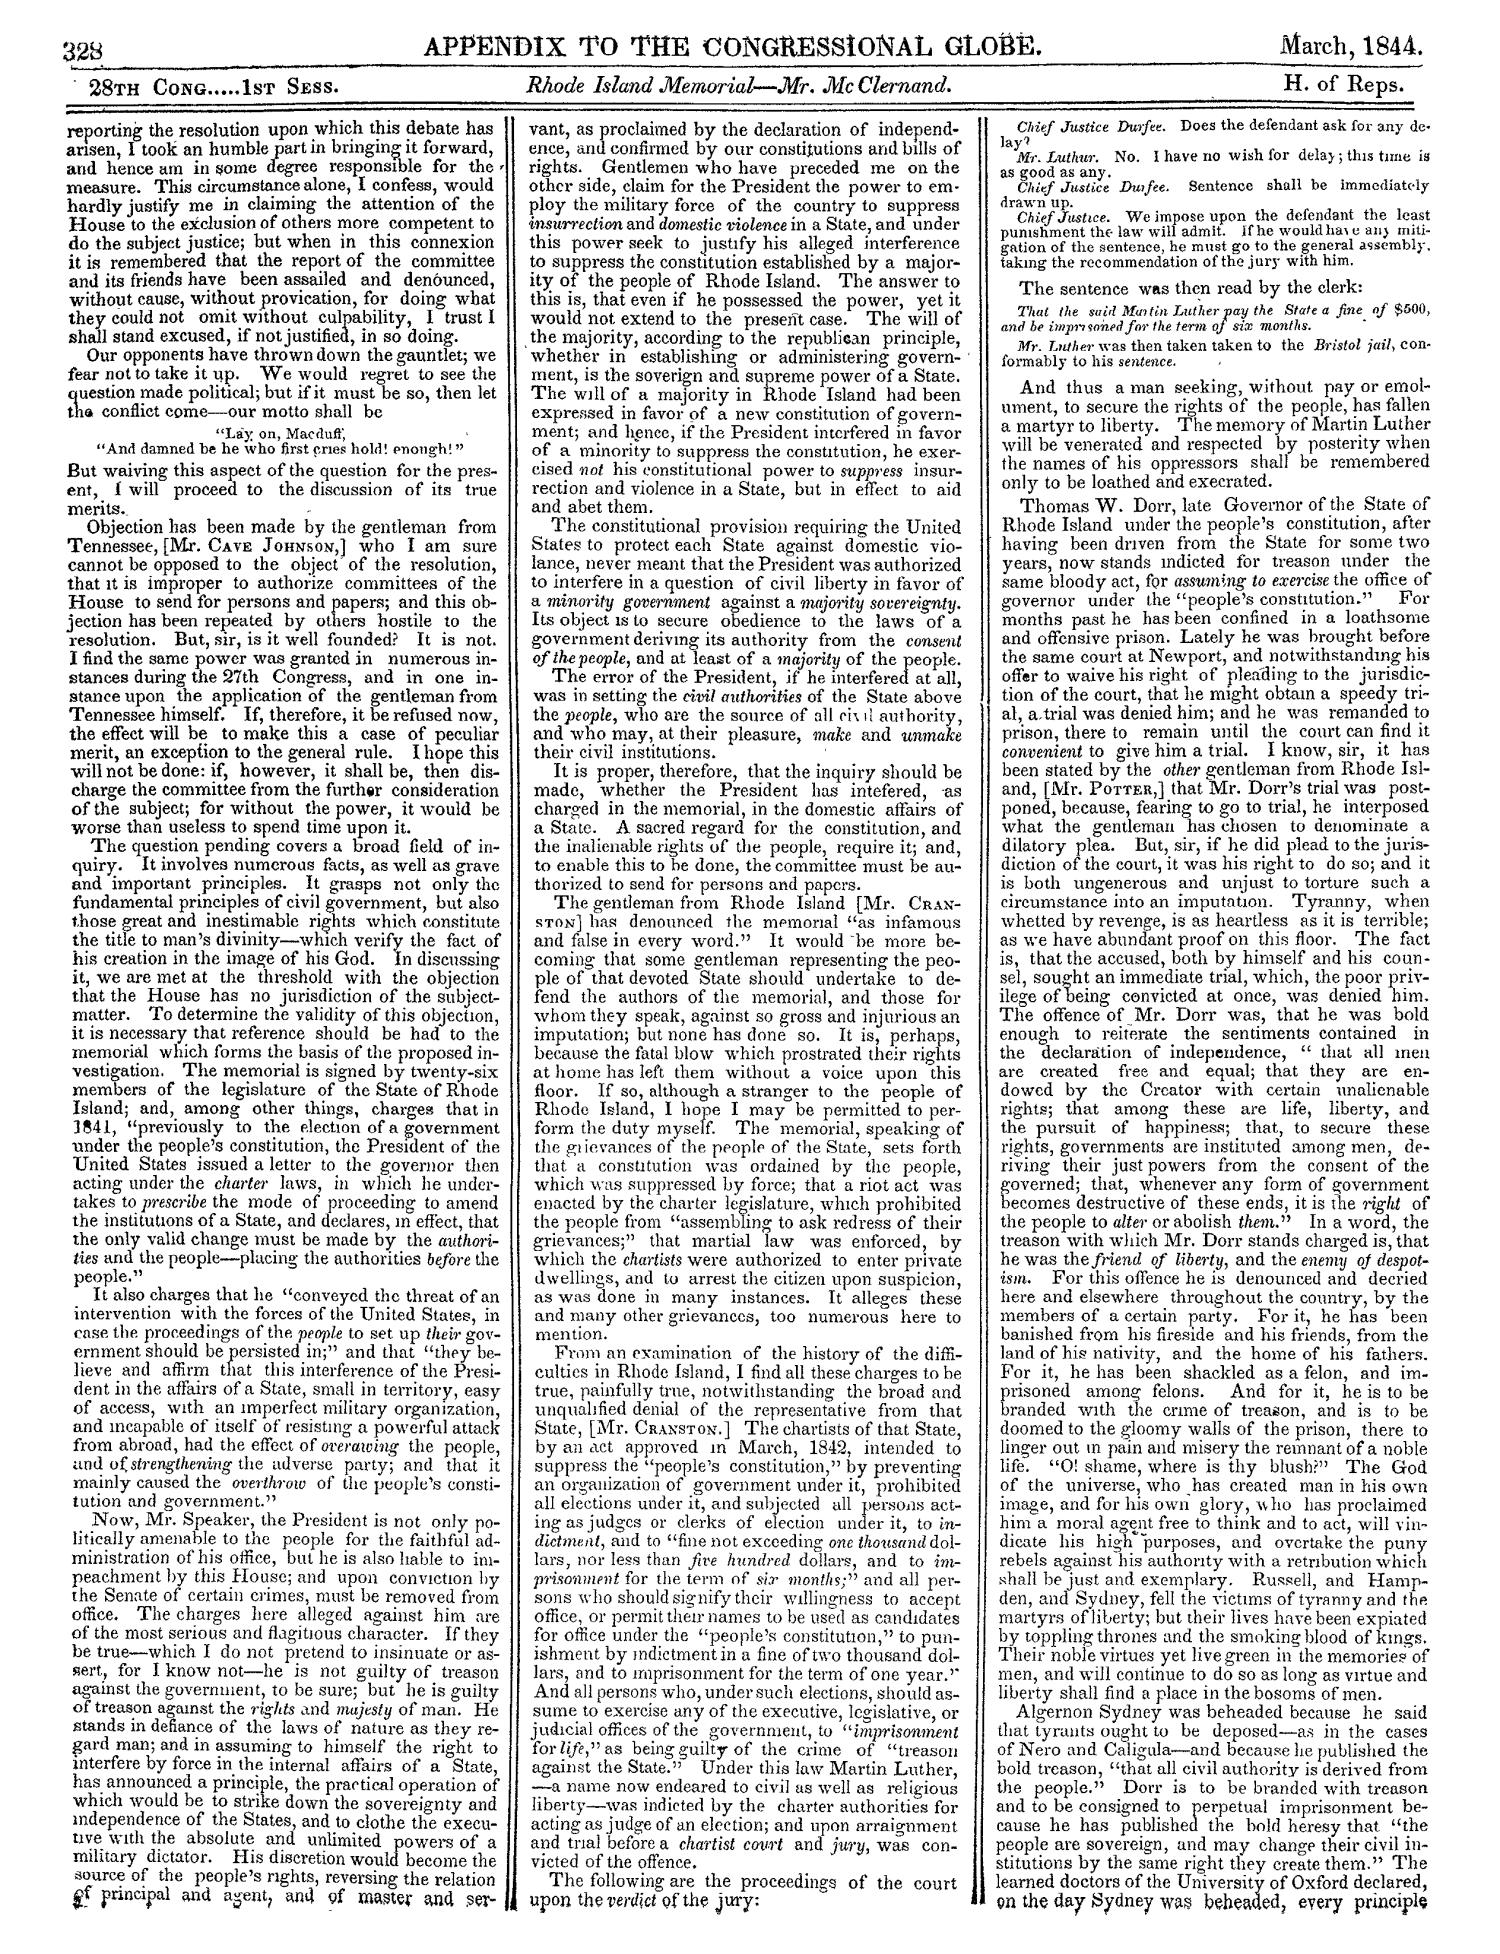 The Congressional Globe, Volume 13, Part 2: Twenty-Eighth Congress, First Session
                                                
                                                    328
                                                